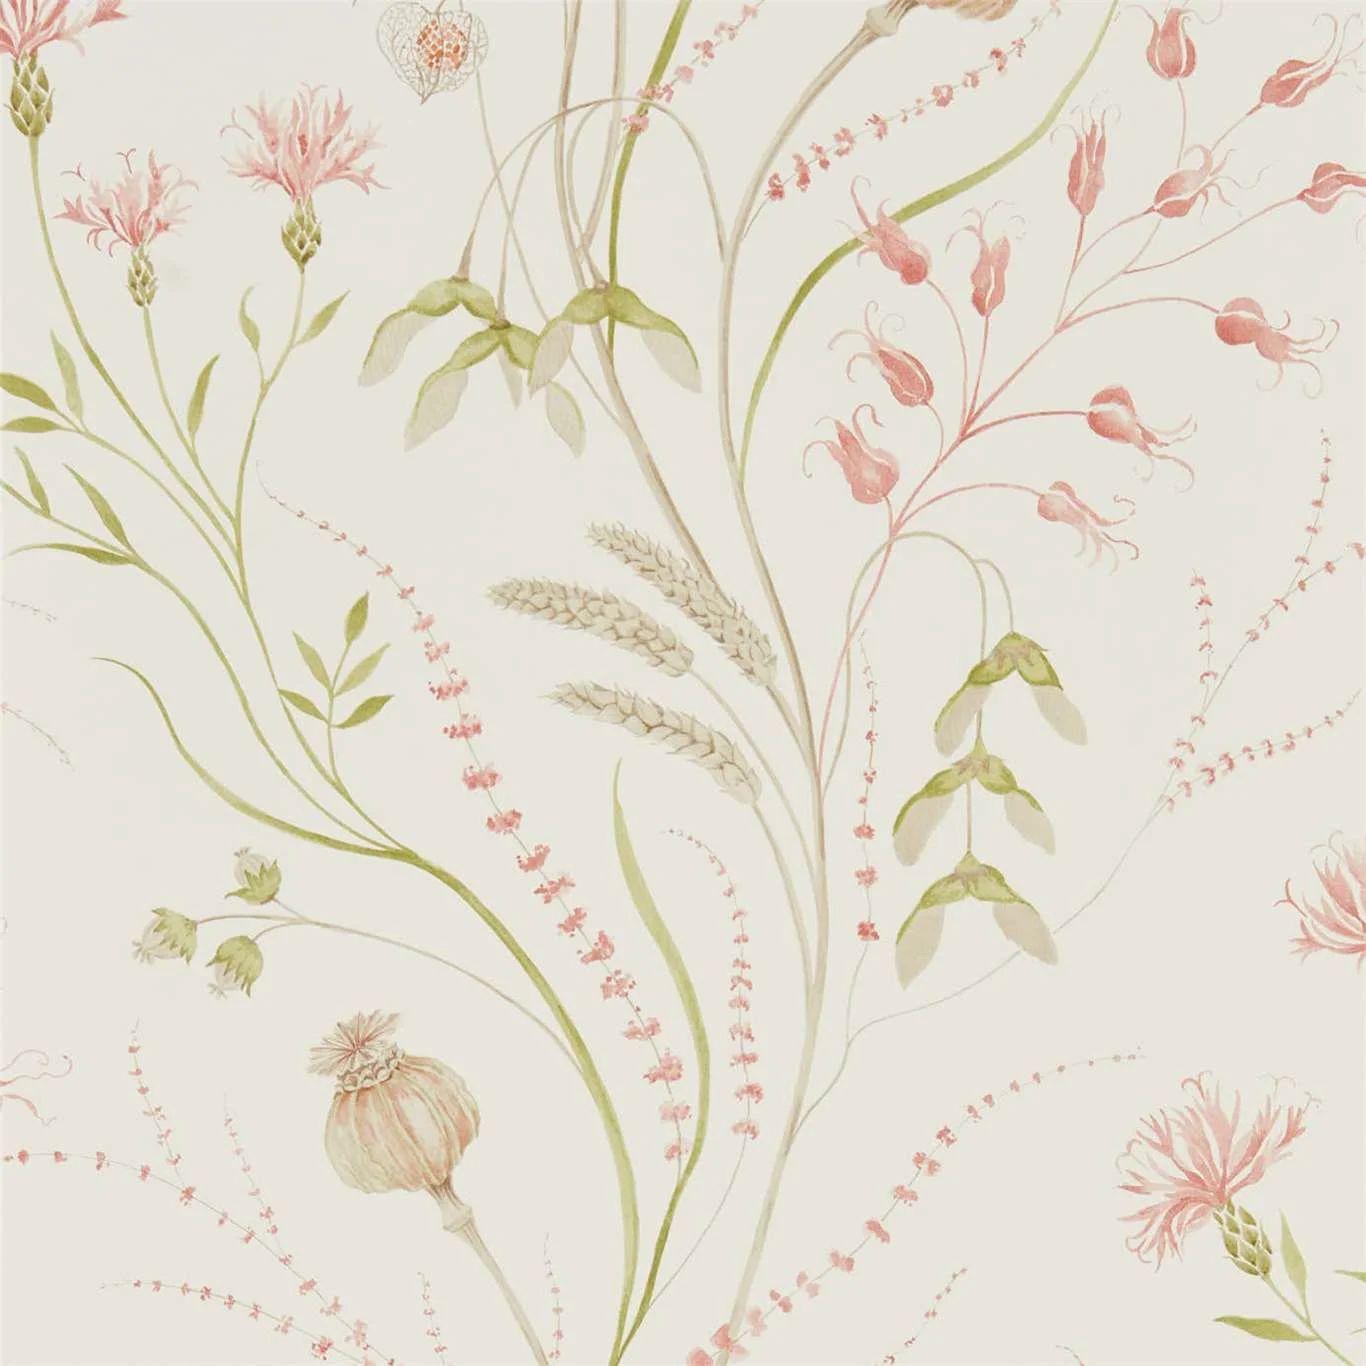 Summer Harvest Floral Wallpaper Roll by In-House | Wayfair North America